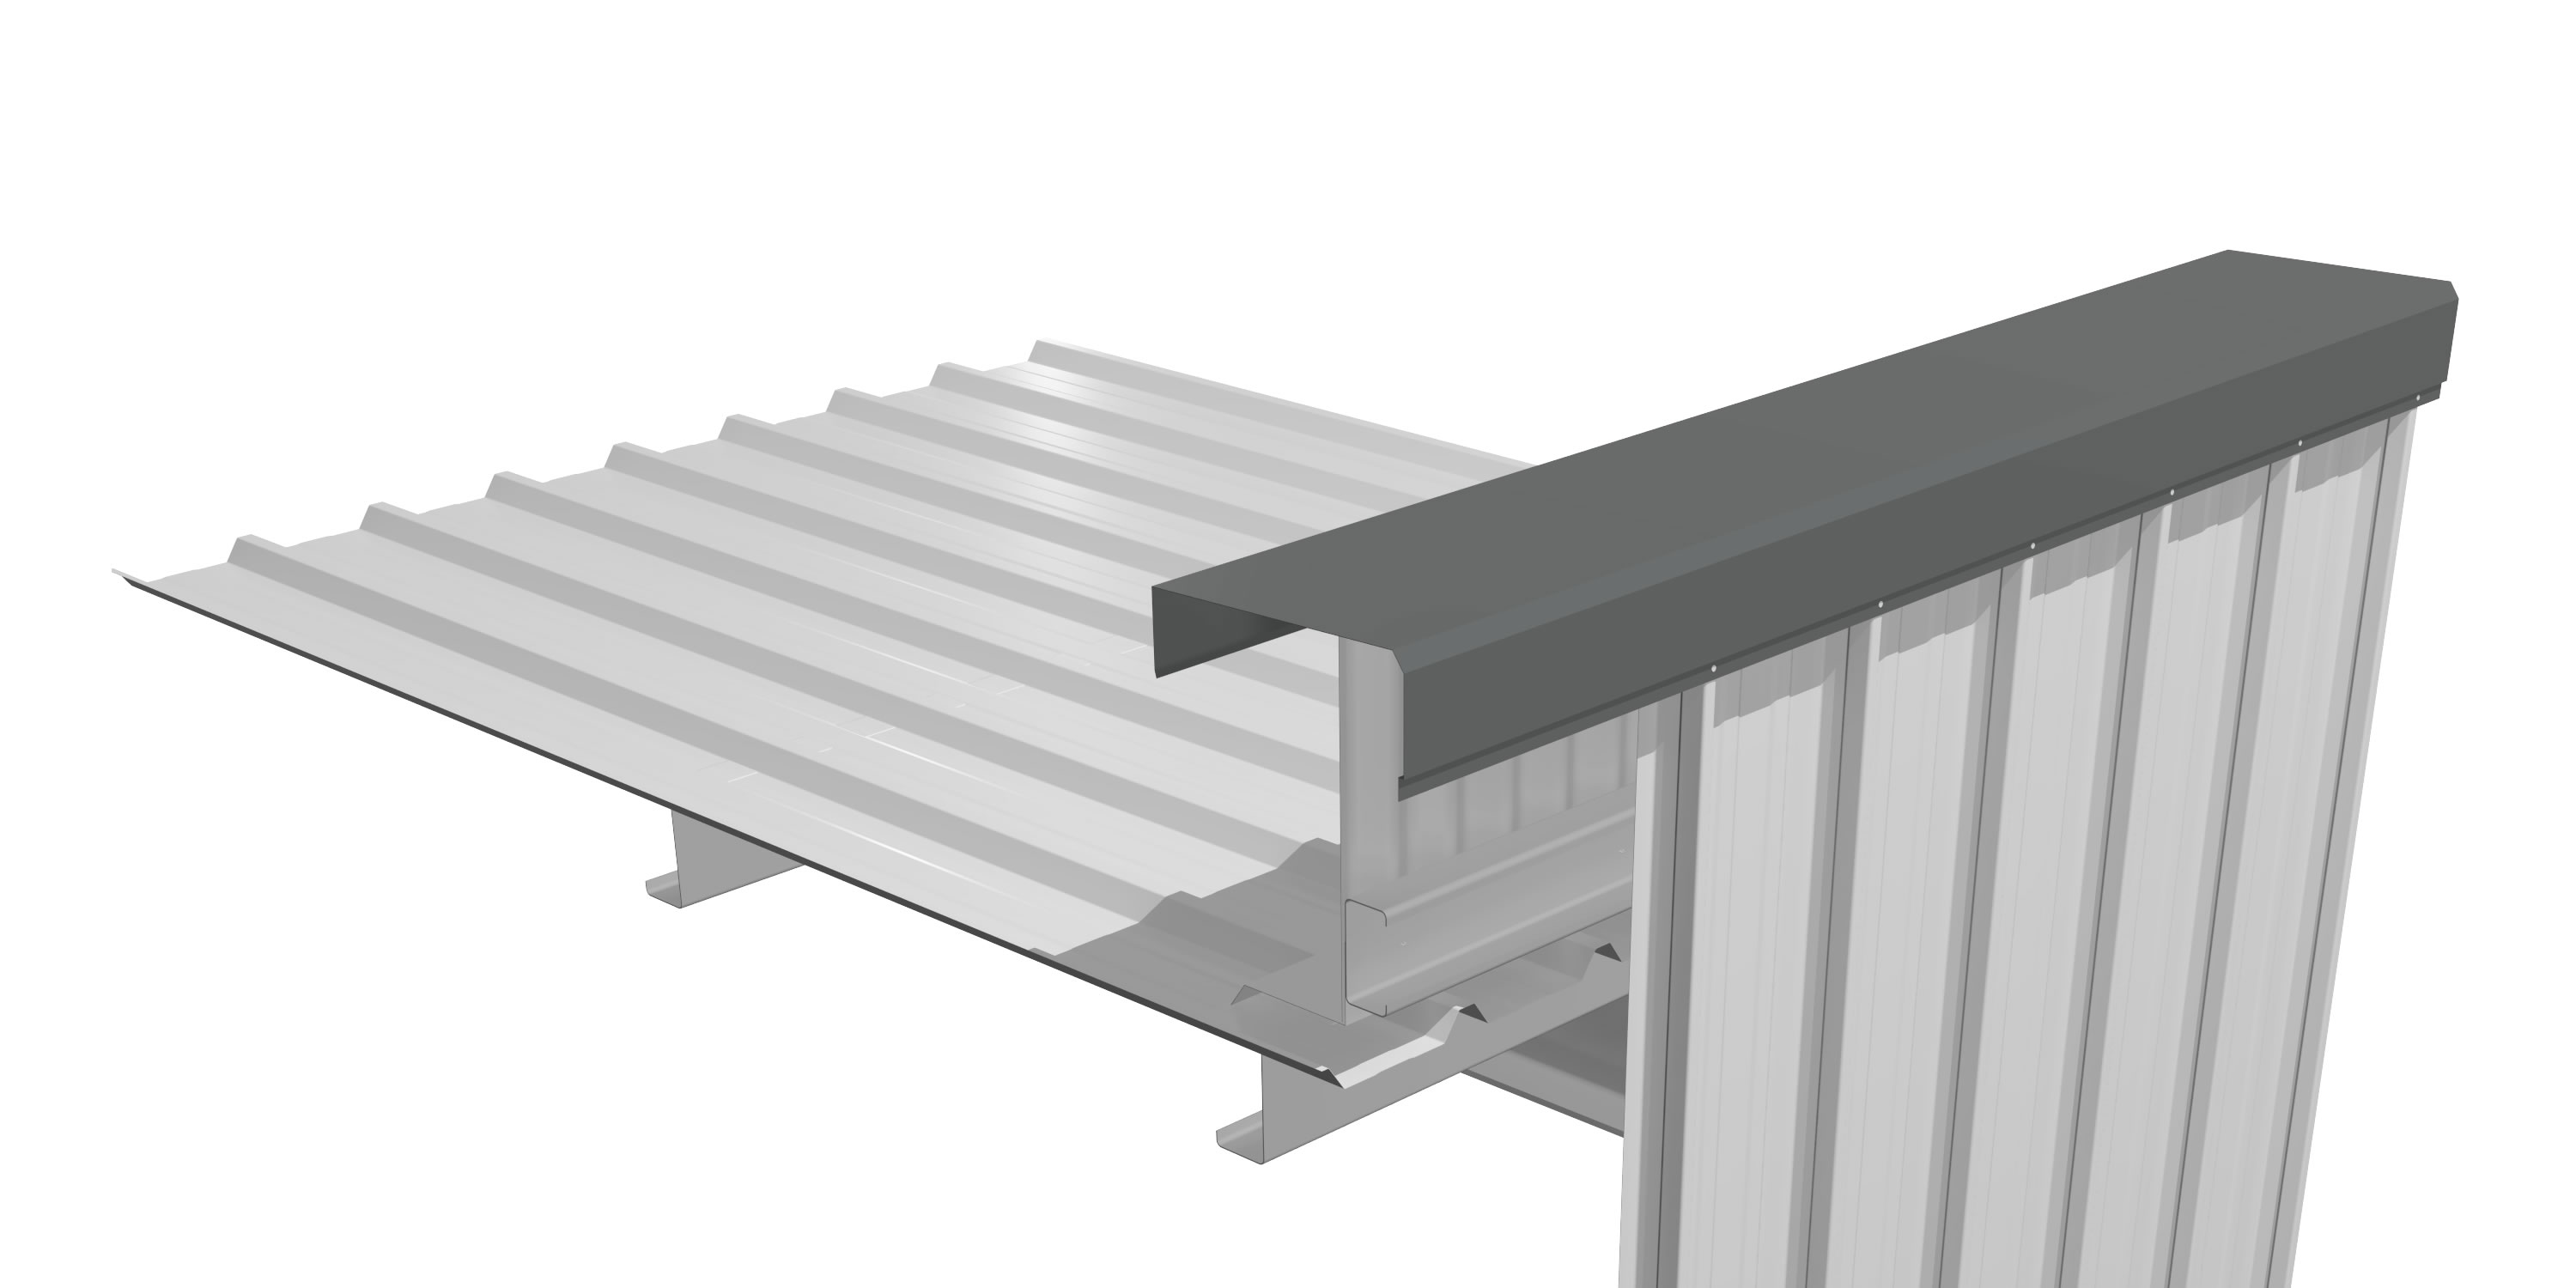 Parapet capping